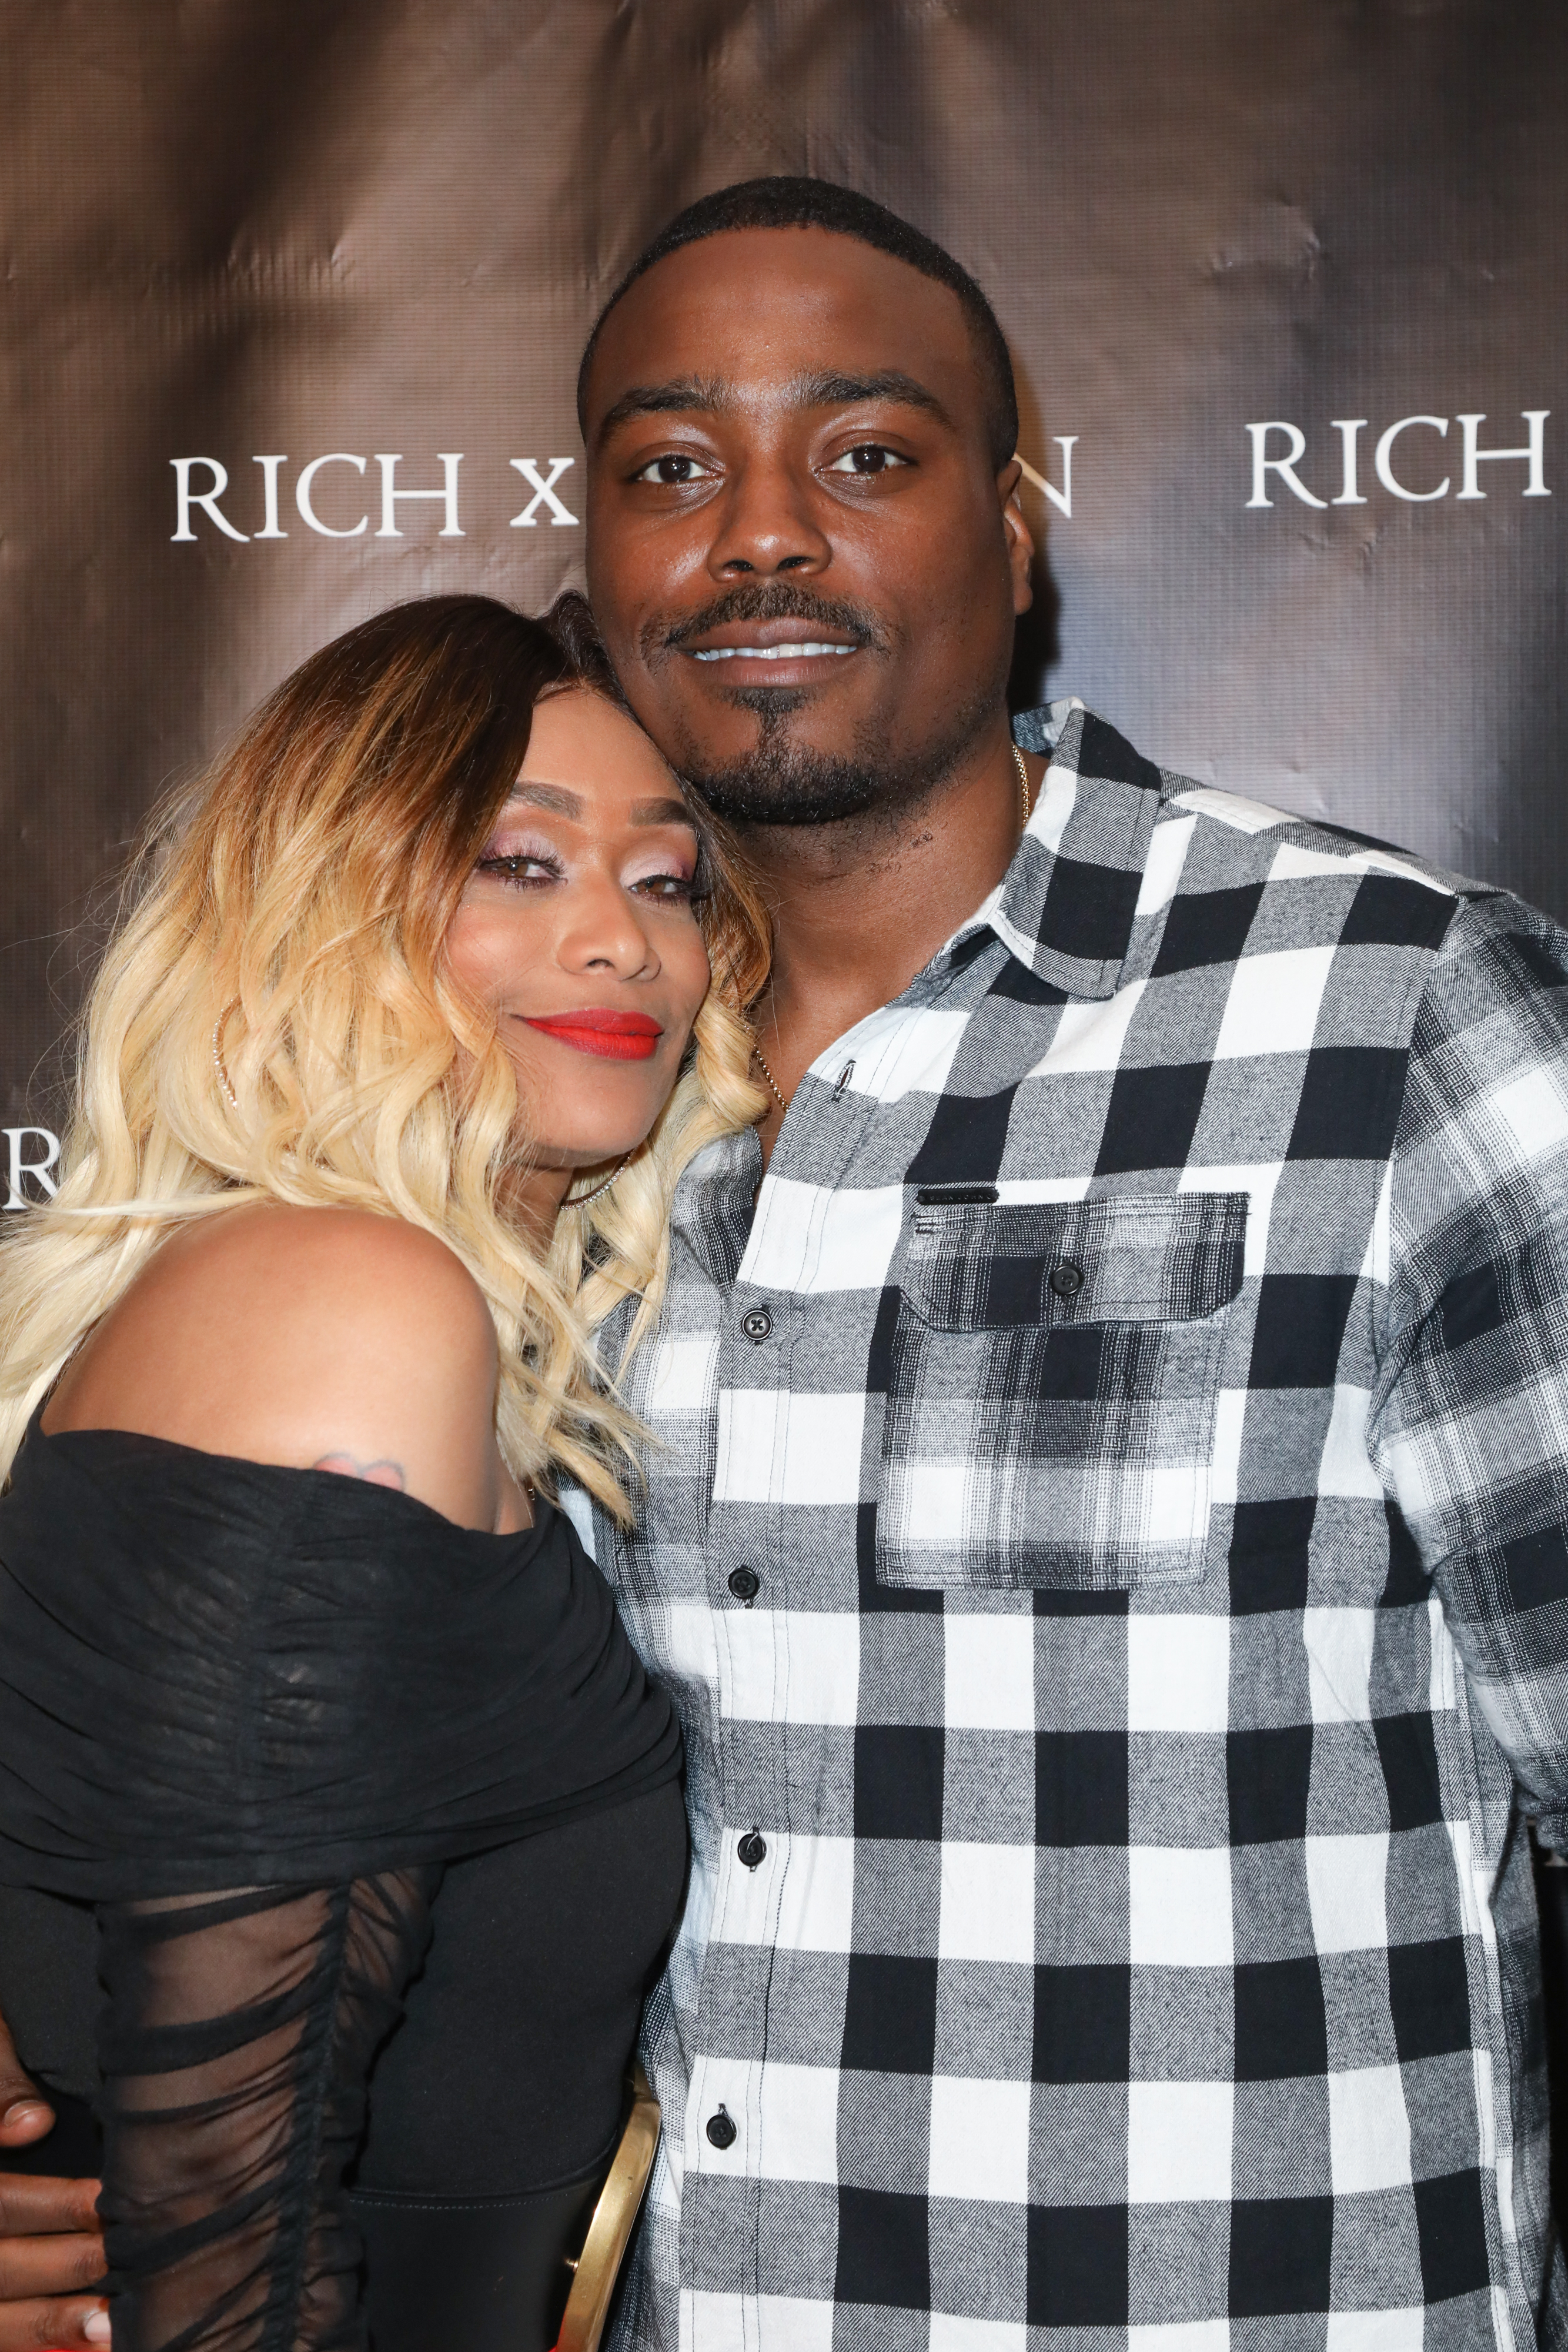 Tami Roman's Spring Shoe Release Party